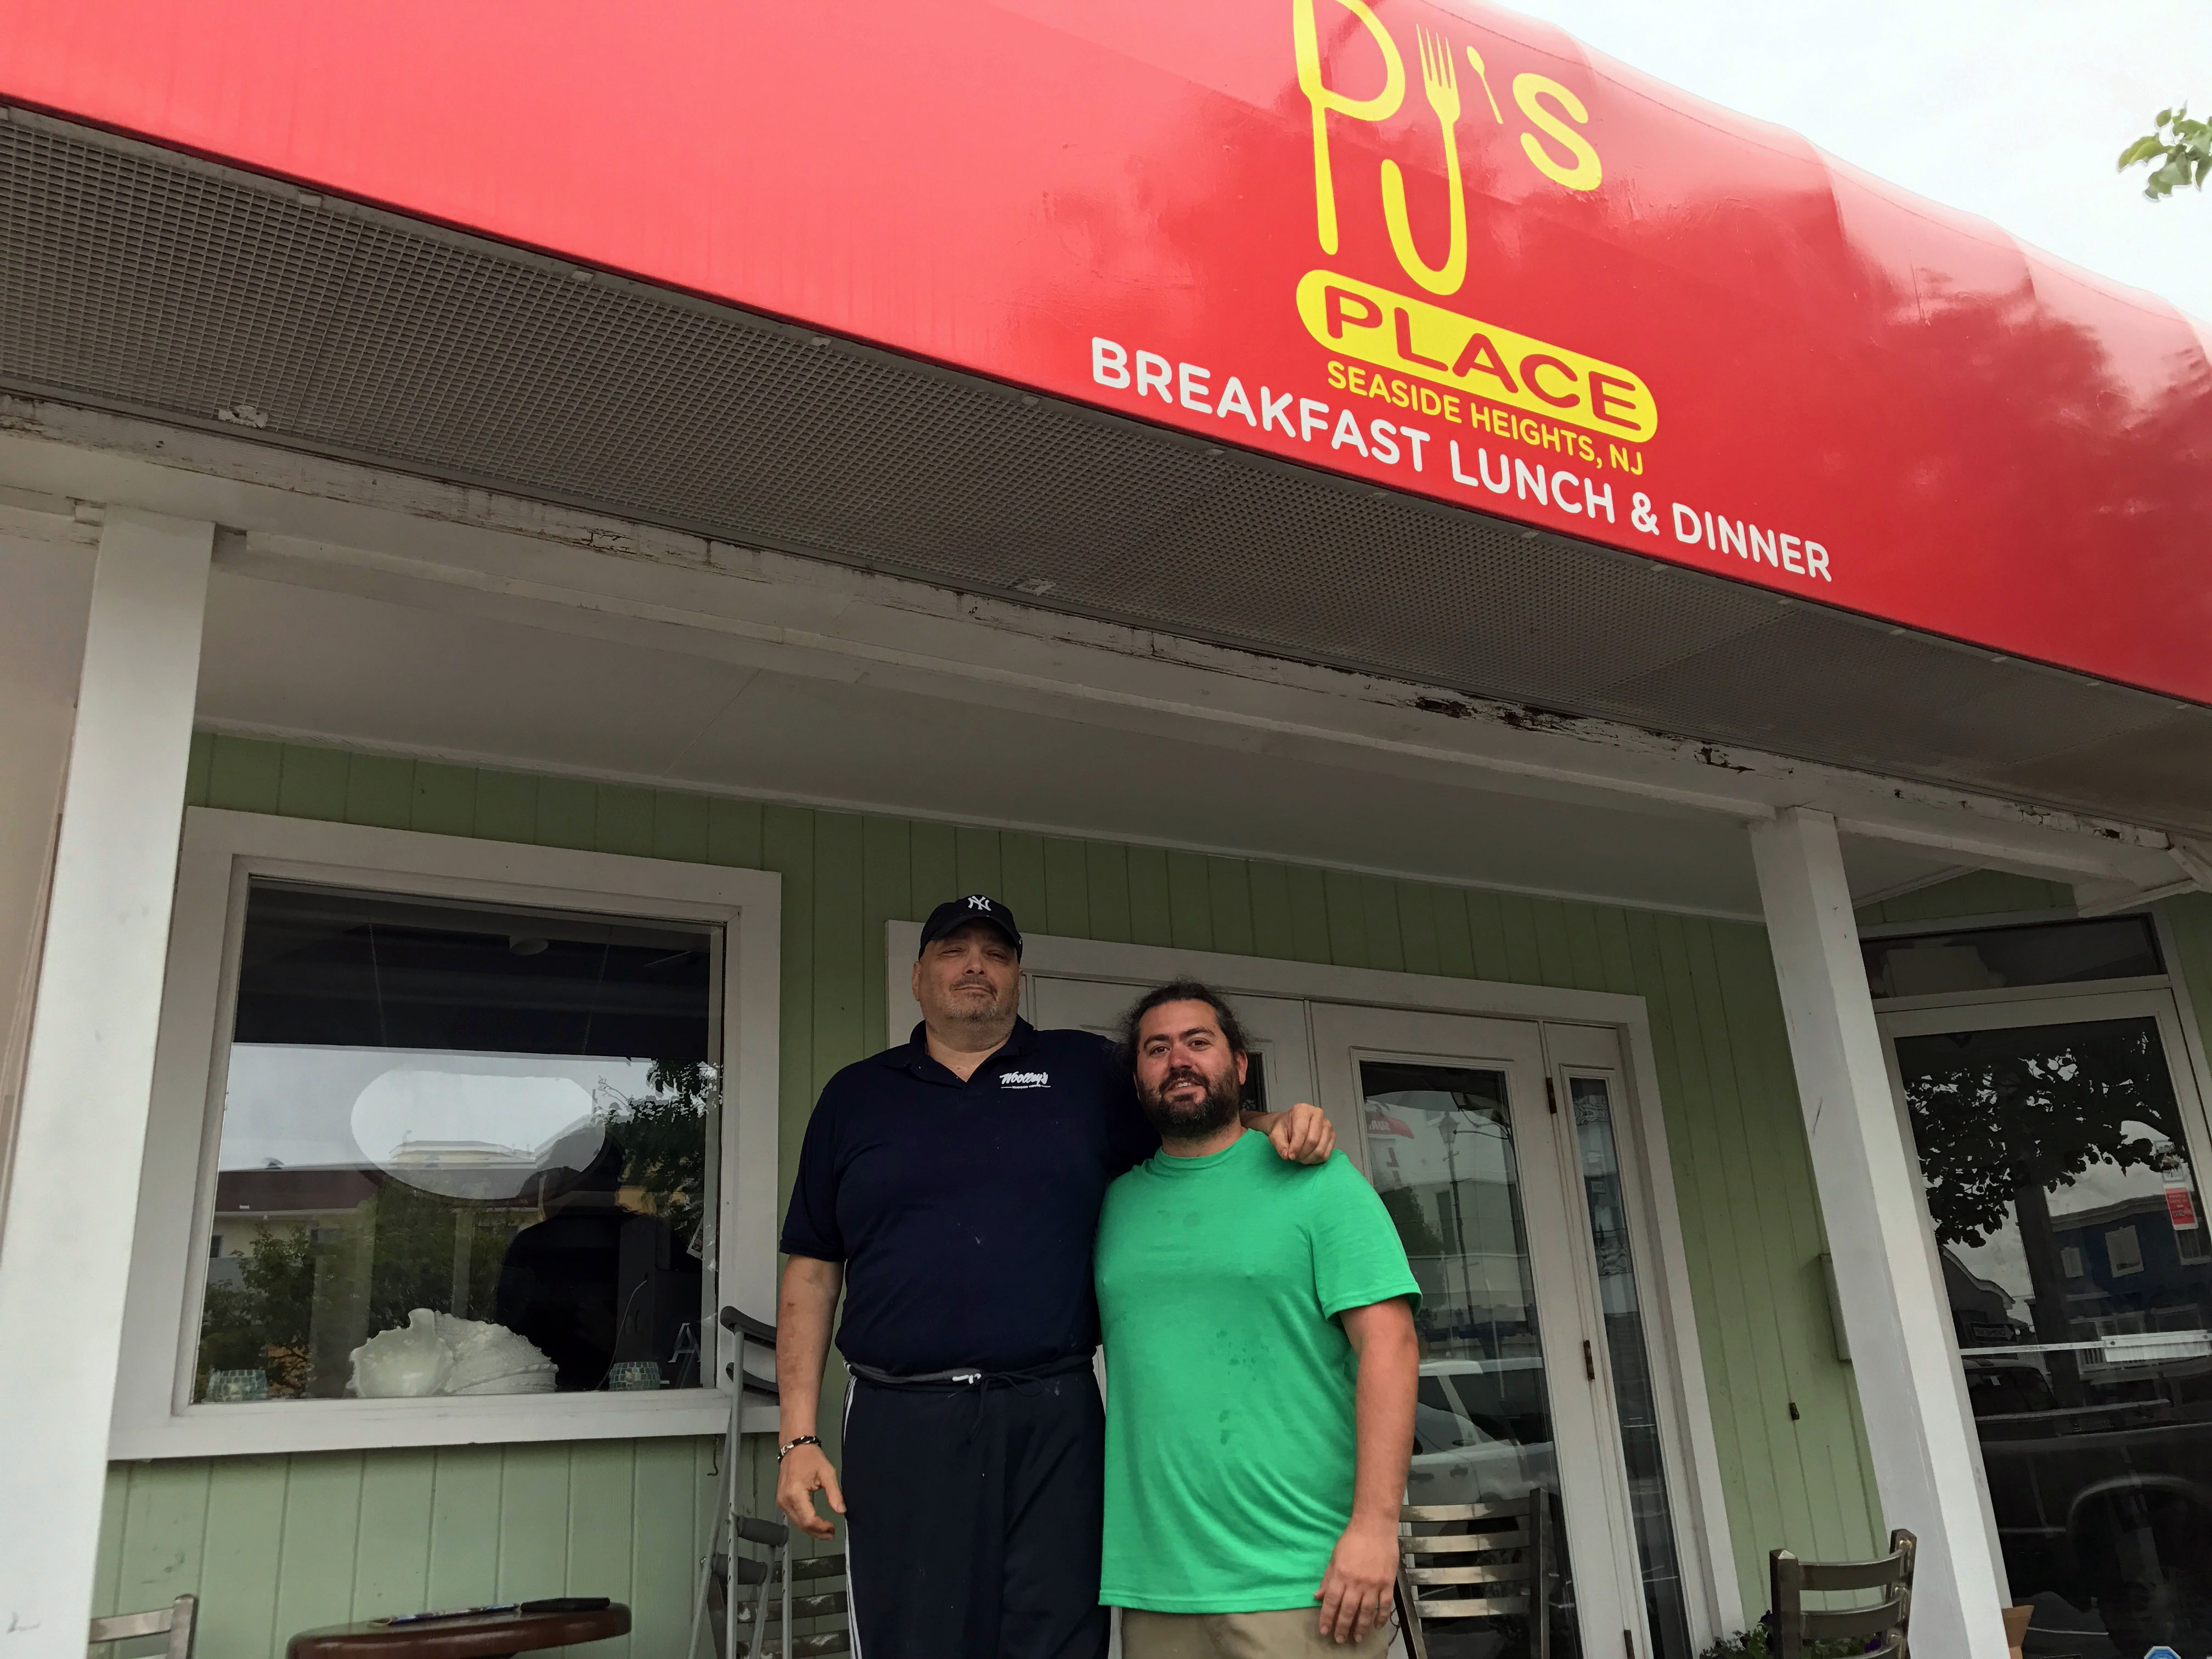 Anthony DeMarsico (left) and PJ Turso, owners of PJ's Place in Seaside Heights. (Photo: Daniel Nee)